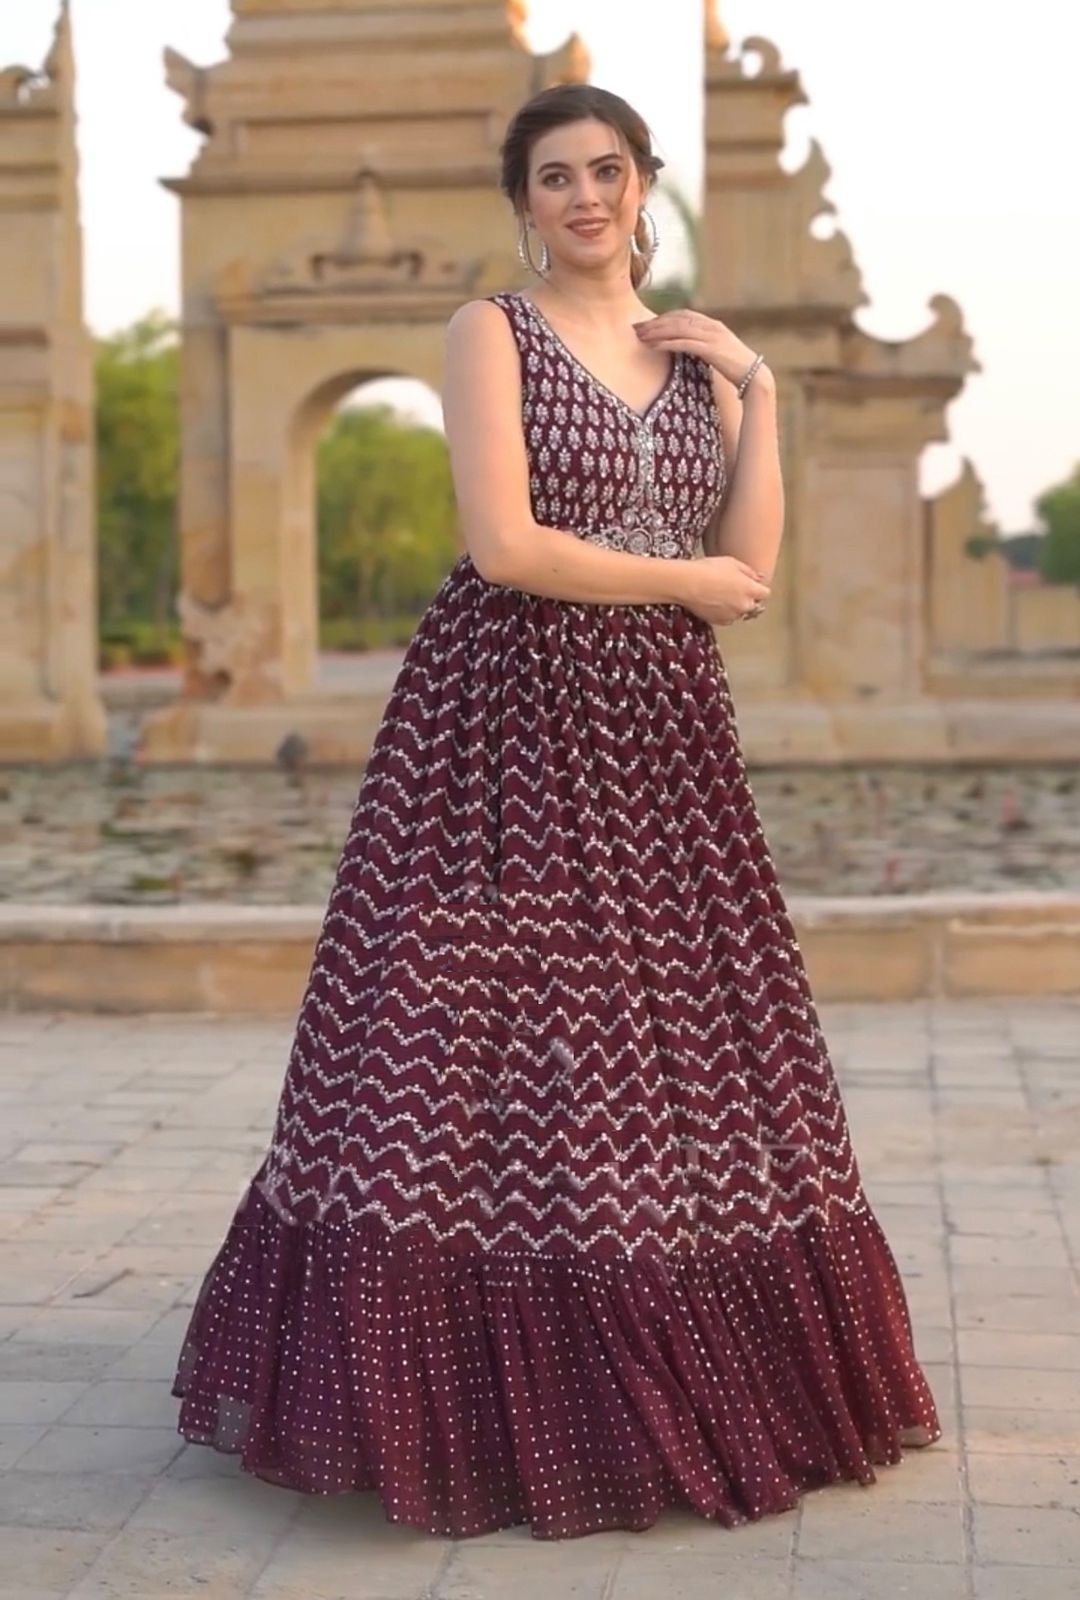 Stunning Collection: 999+ Breathtaking Images of Exquisite Long Gowns in  Full 4K